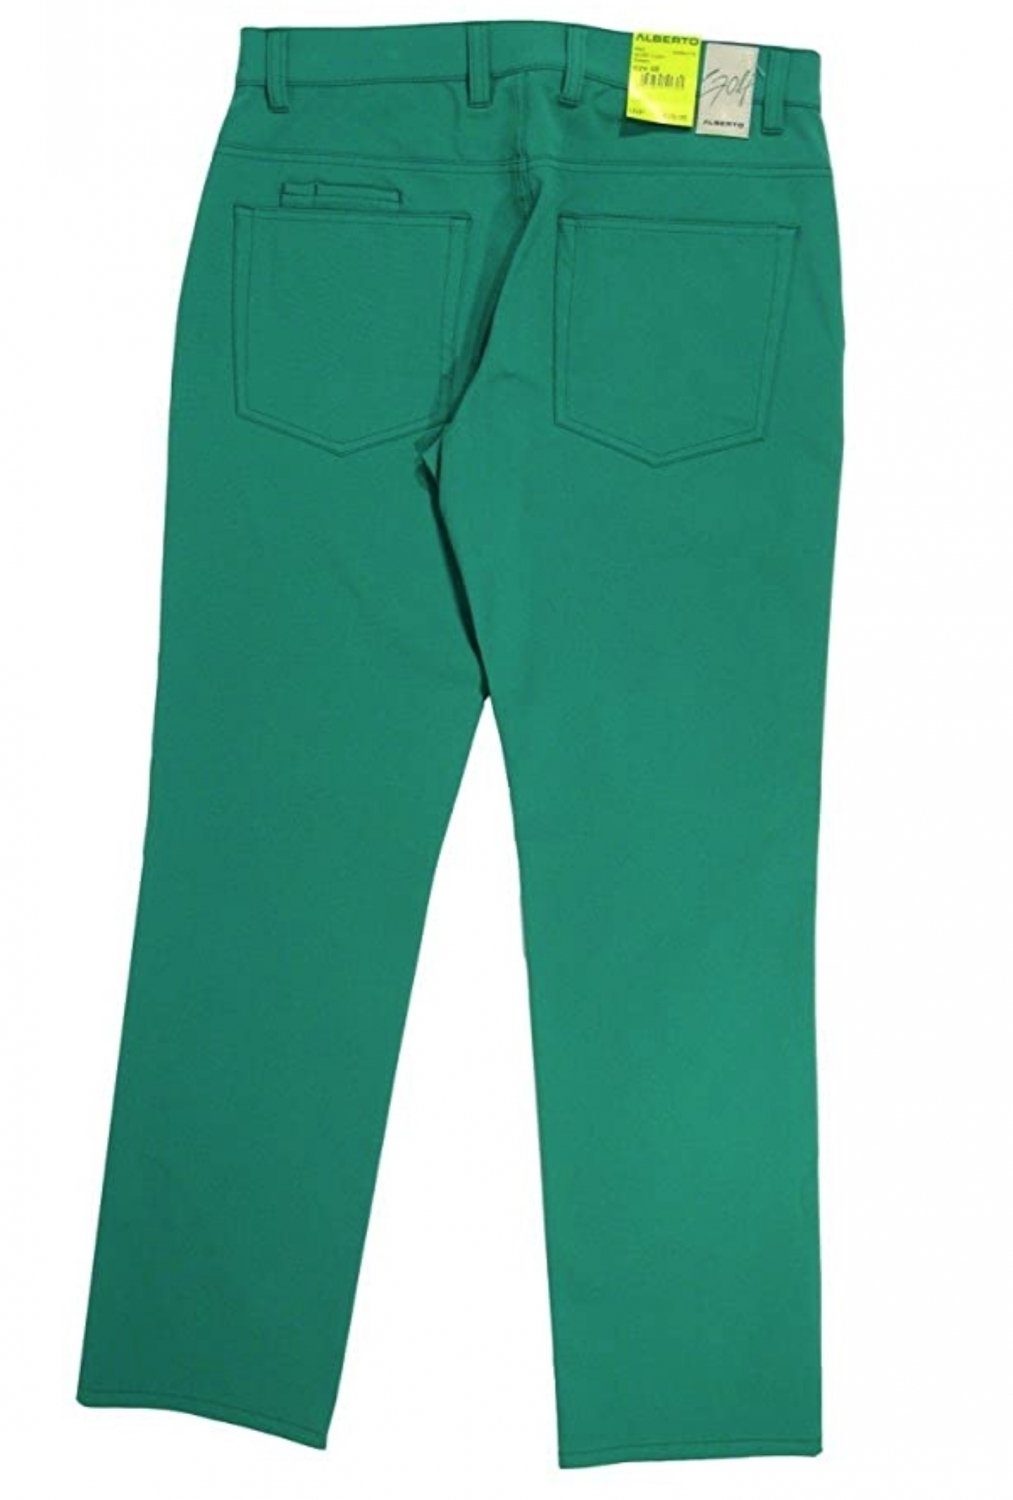 PRO GREEN DRY Alberto 3X COOLER Golfhose